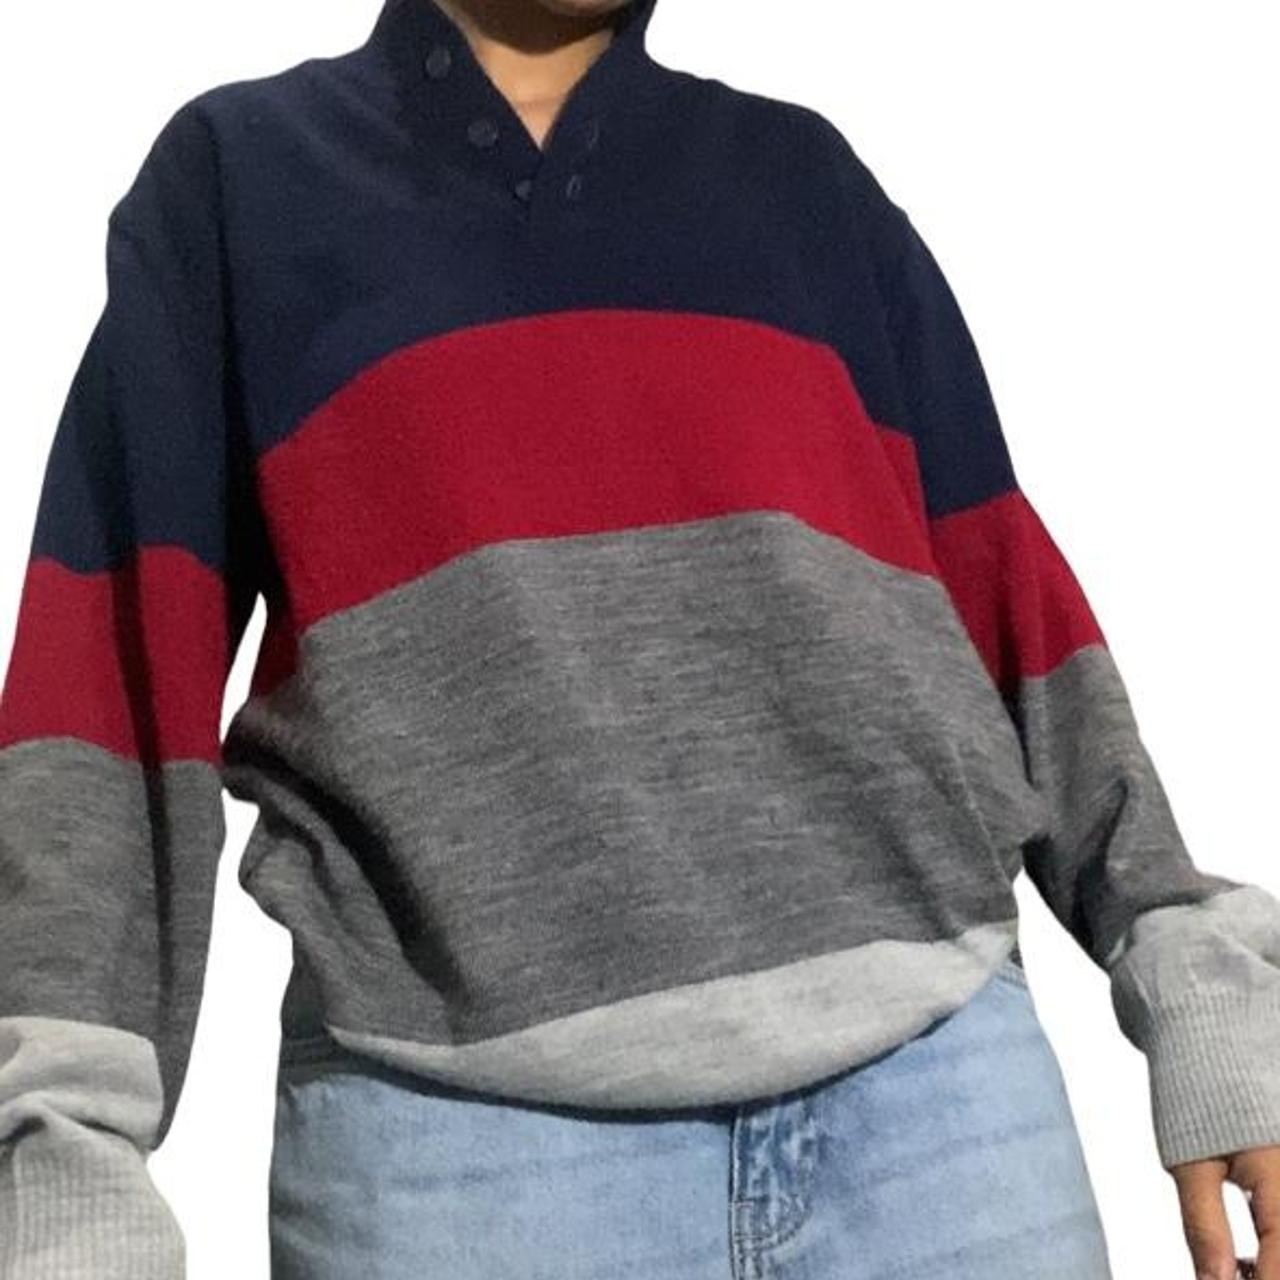 COLORESCIENCE Men's Navy and Red Jumper